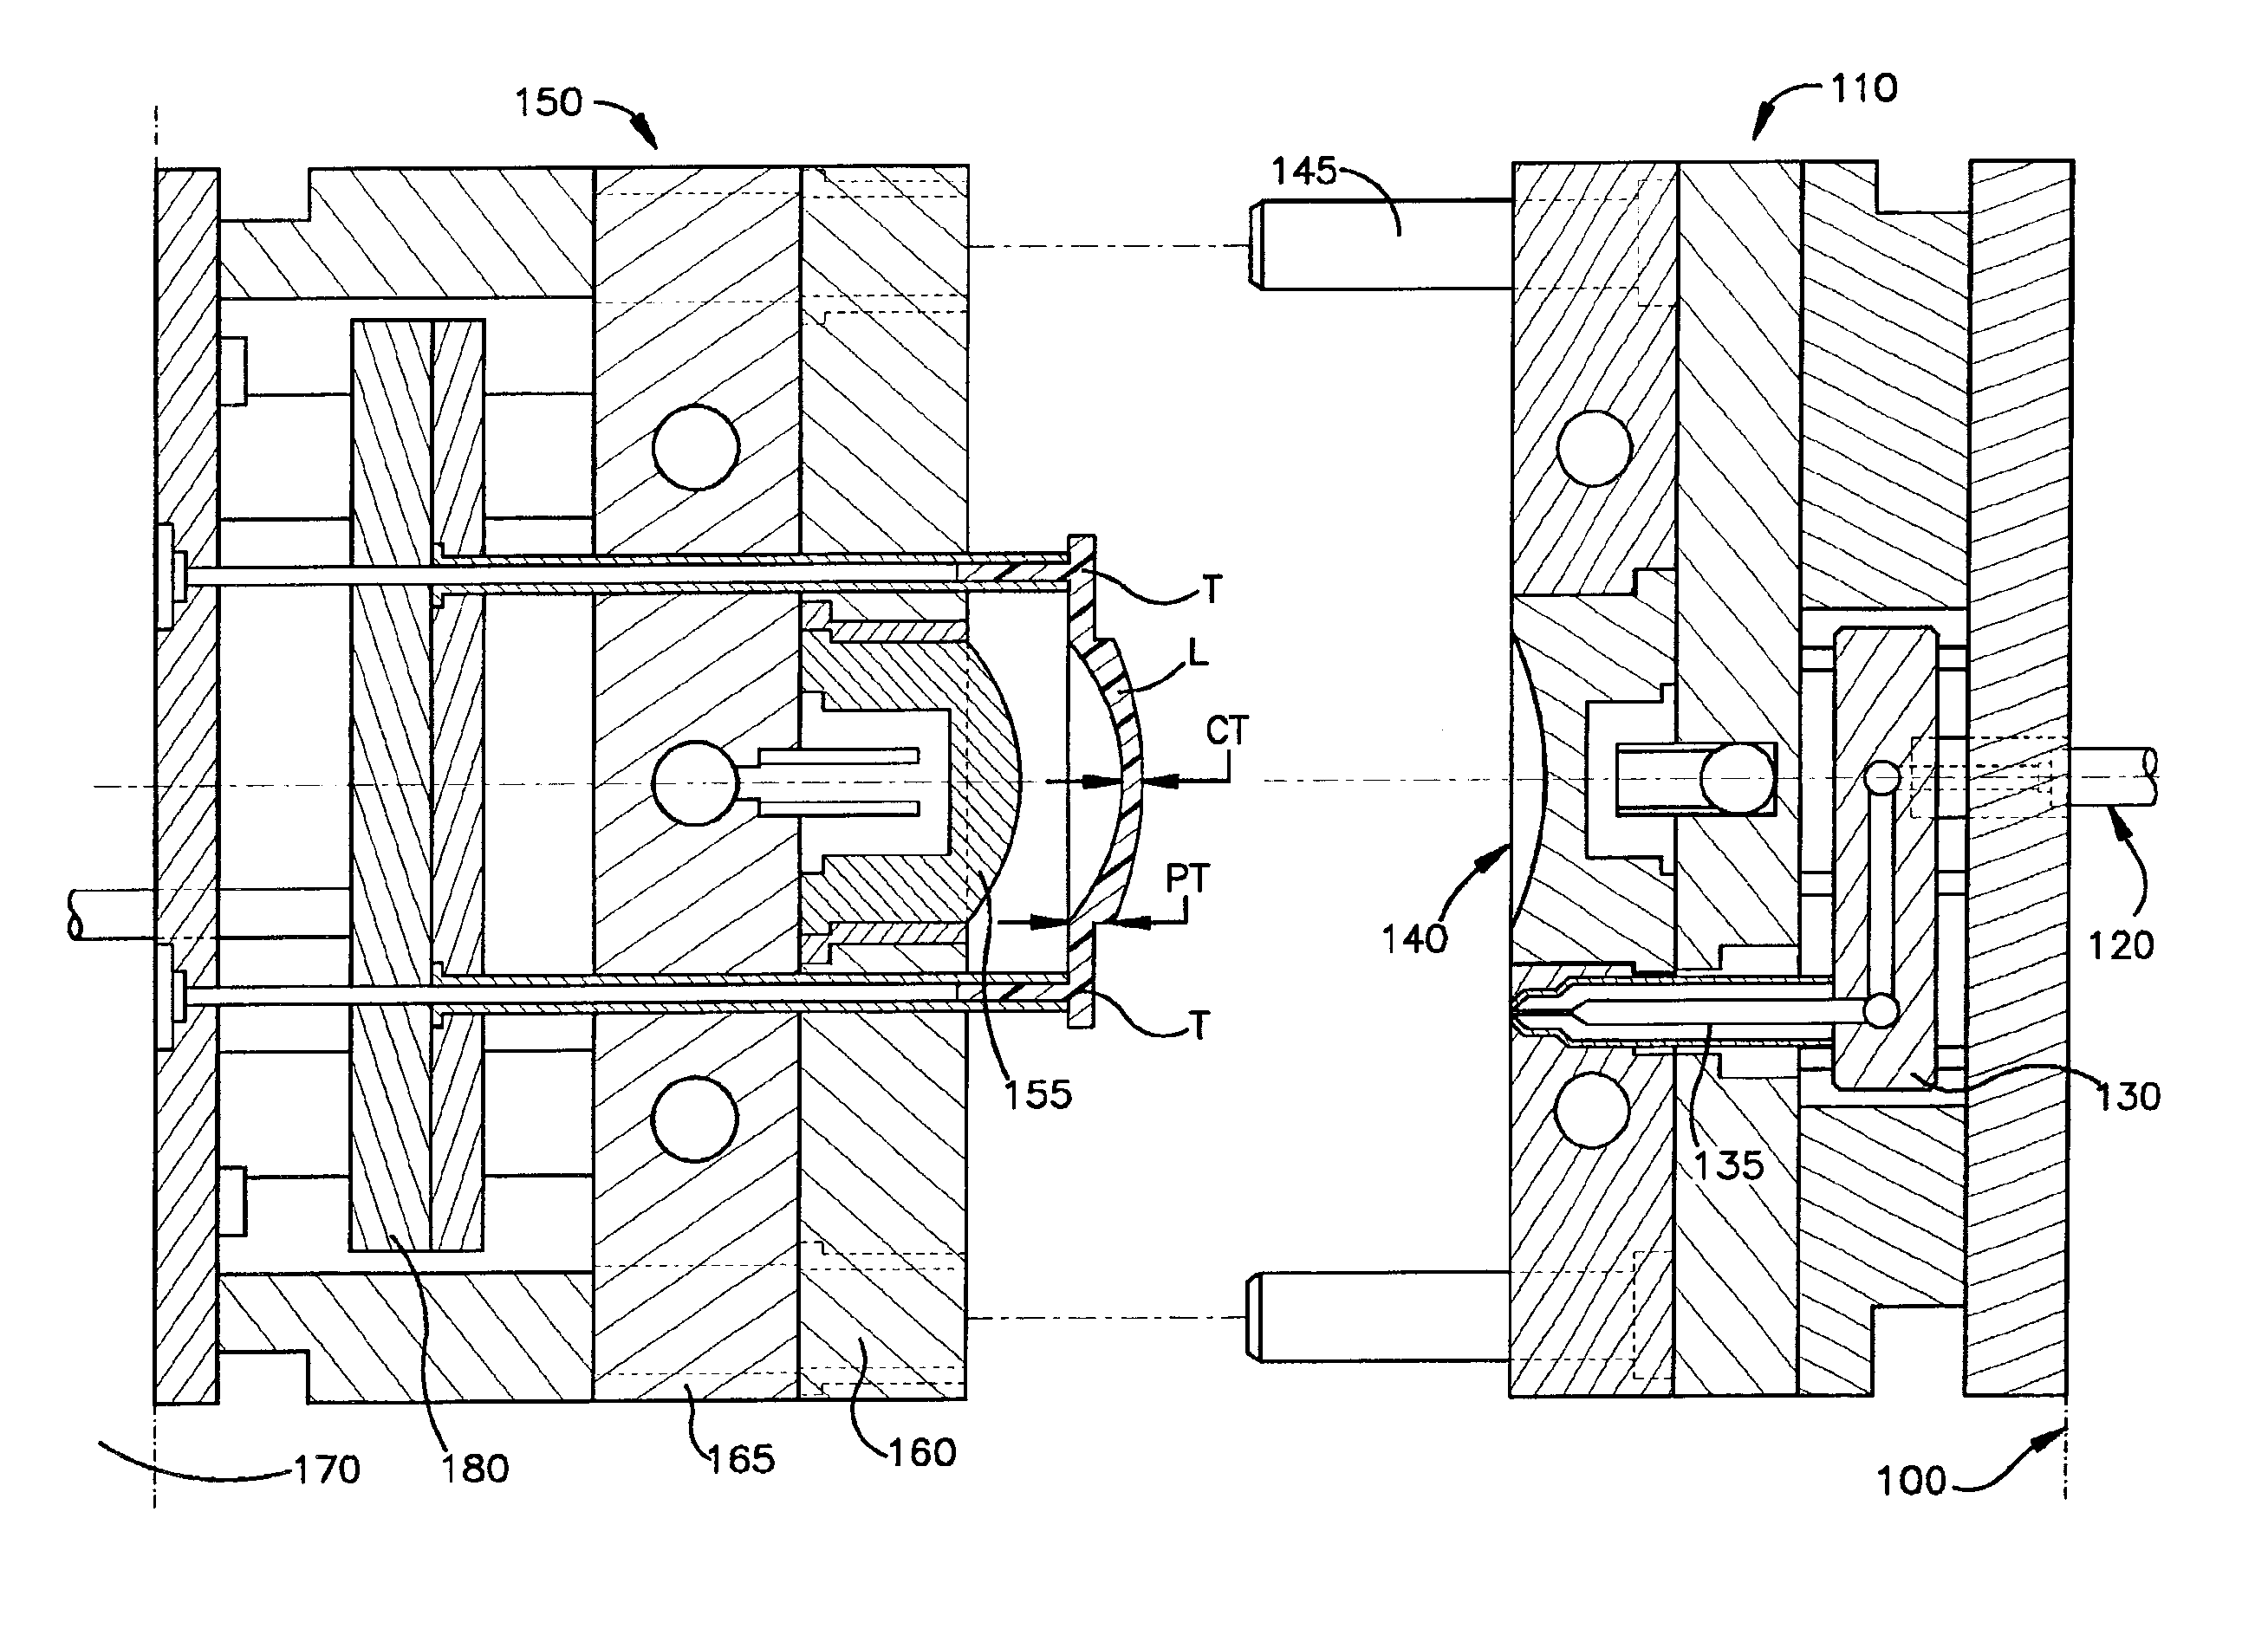 Stress-relieved acrylic optical lenses and methods of manufacture by injection coining molding